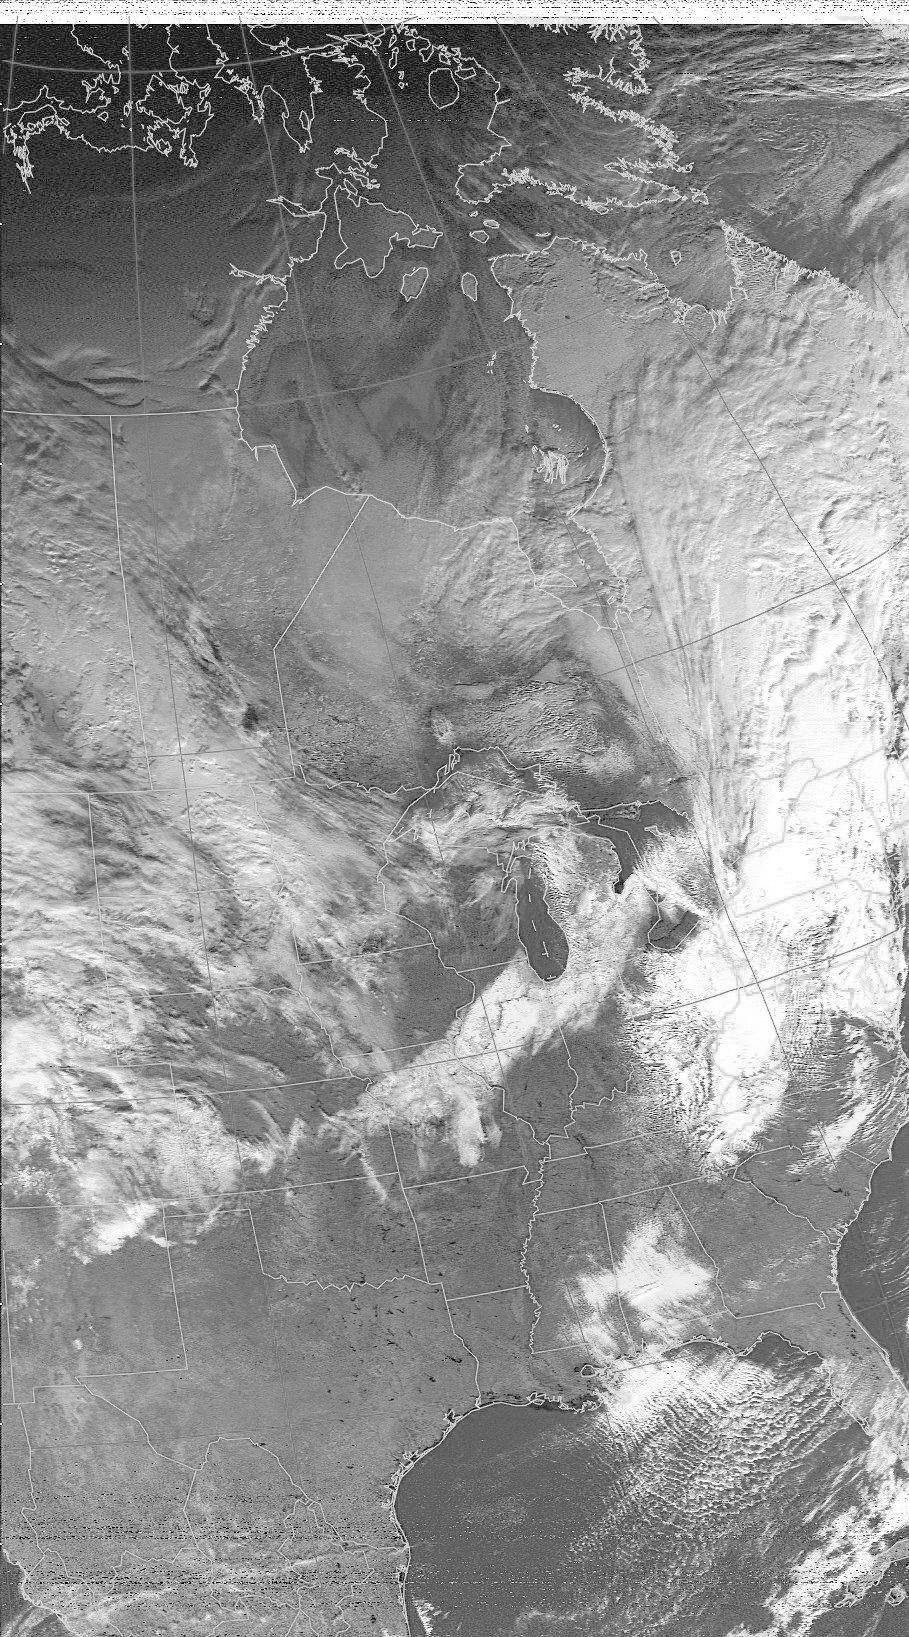 Figure 9 (right): This imagery on Thanksgiving shows a band of snow cover over Illinois and Indiana from a passing cold front.